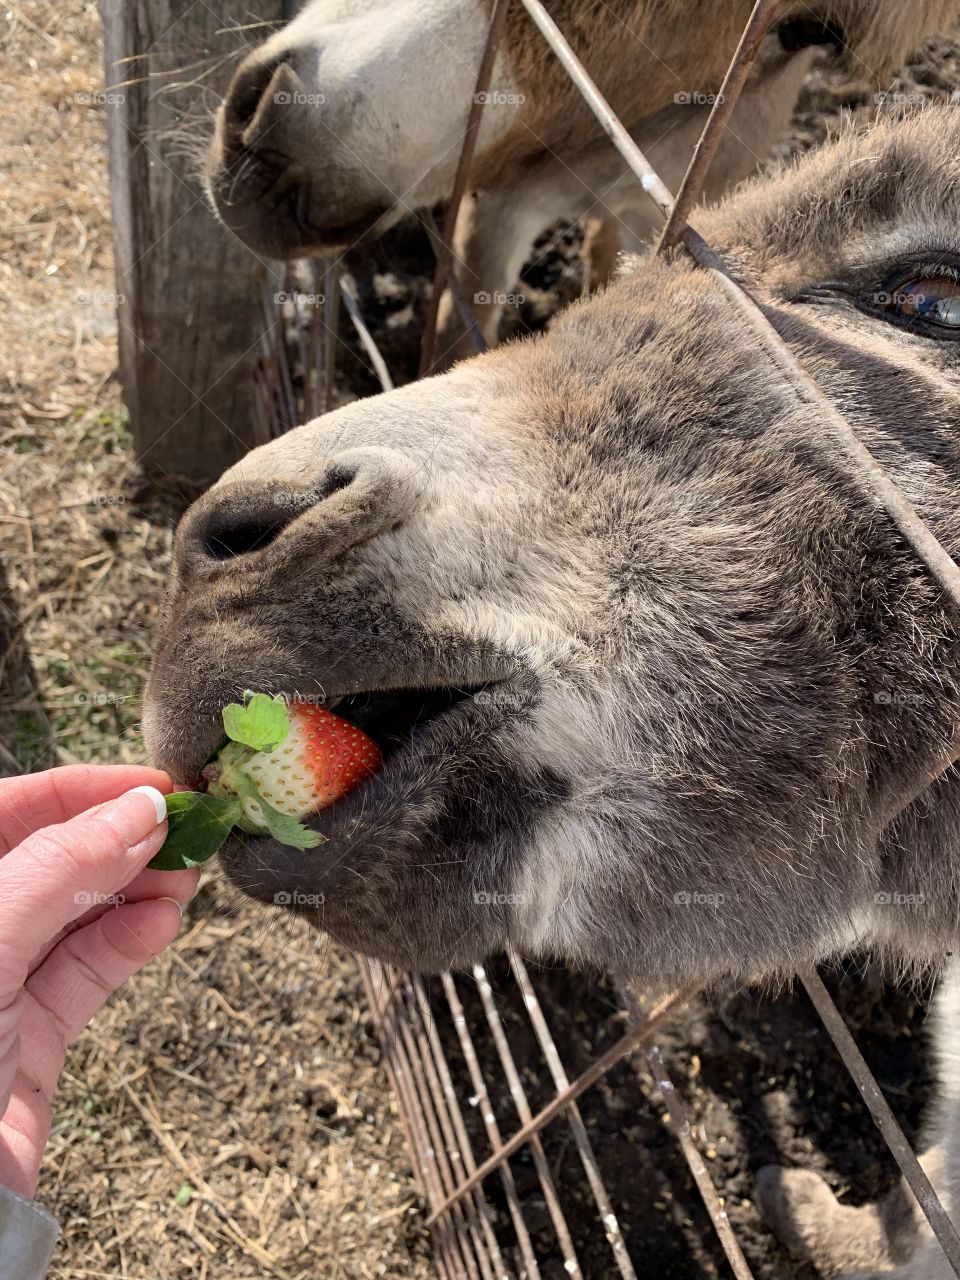 Our Donkey eating a strawberry 